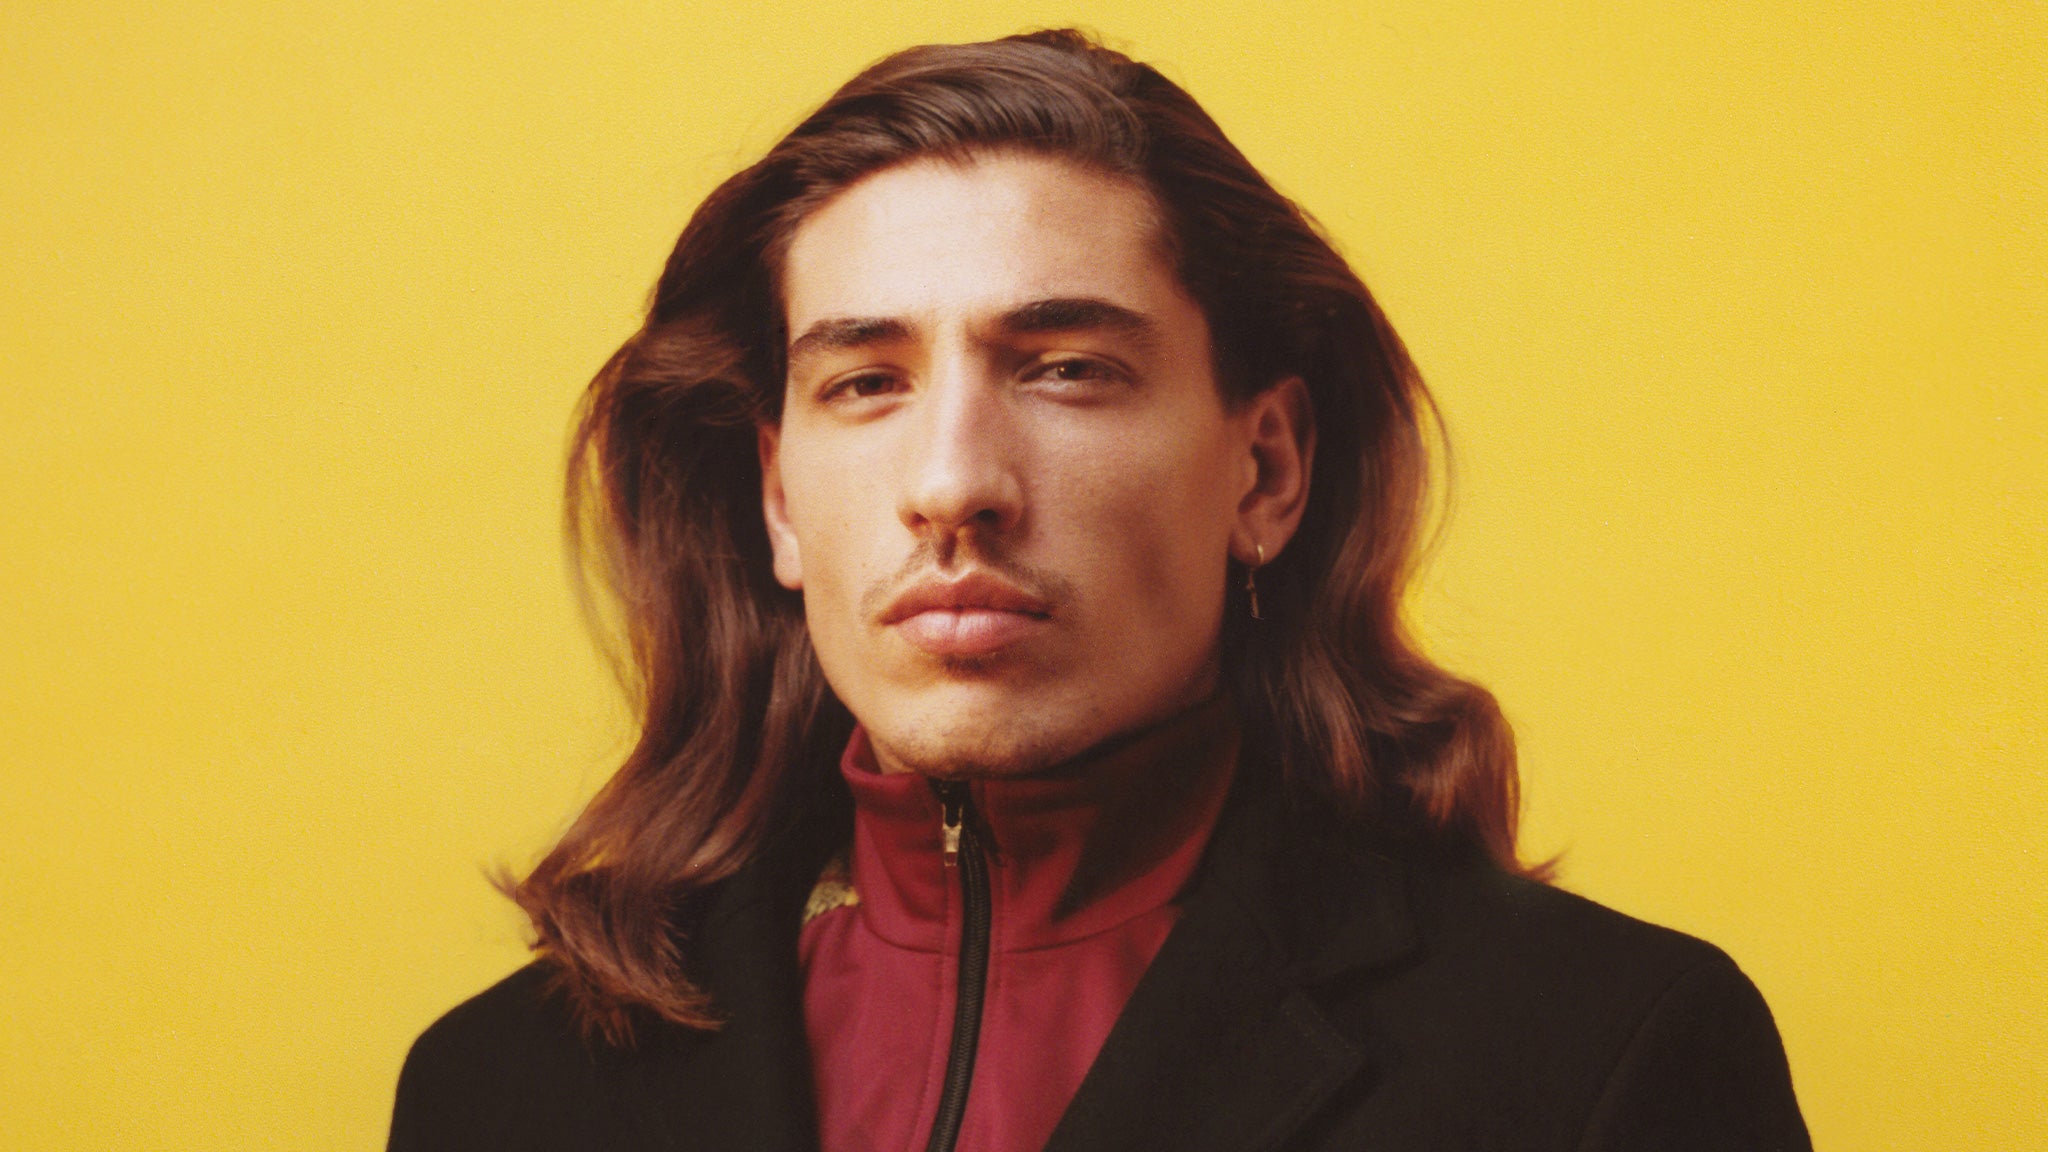 Hector Bellerin Attends Gq Men Year Editorial Stock Photo - Stock Image